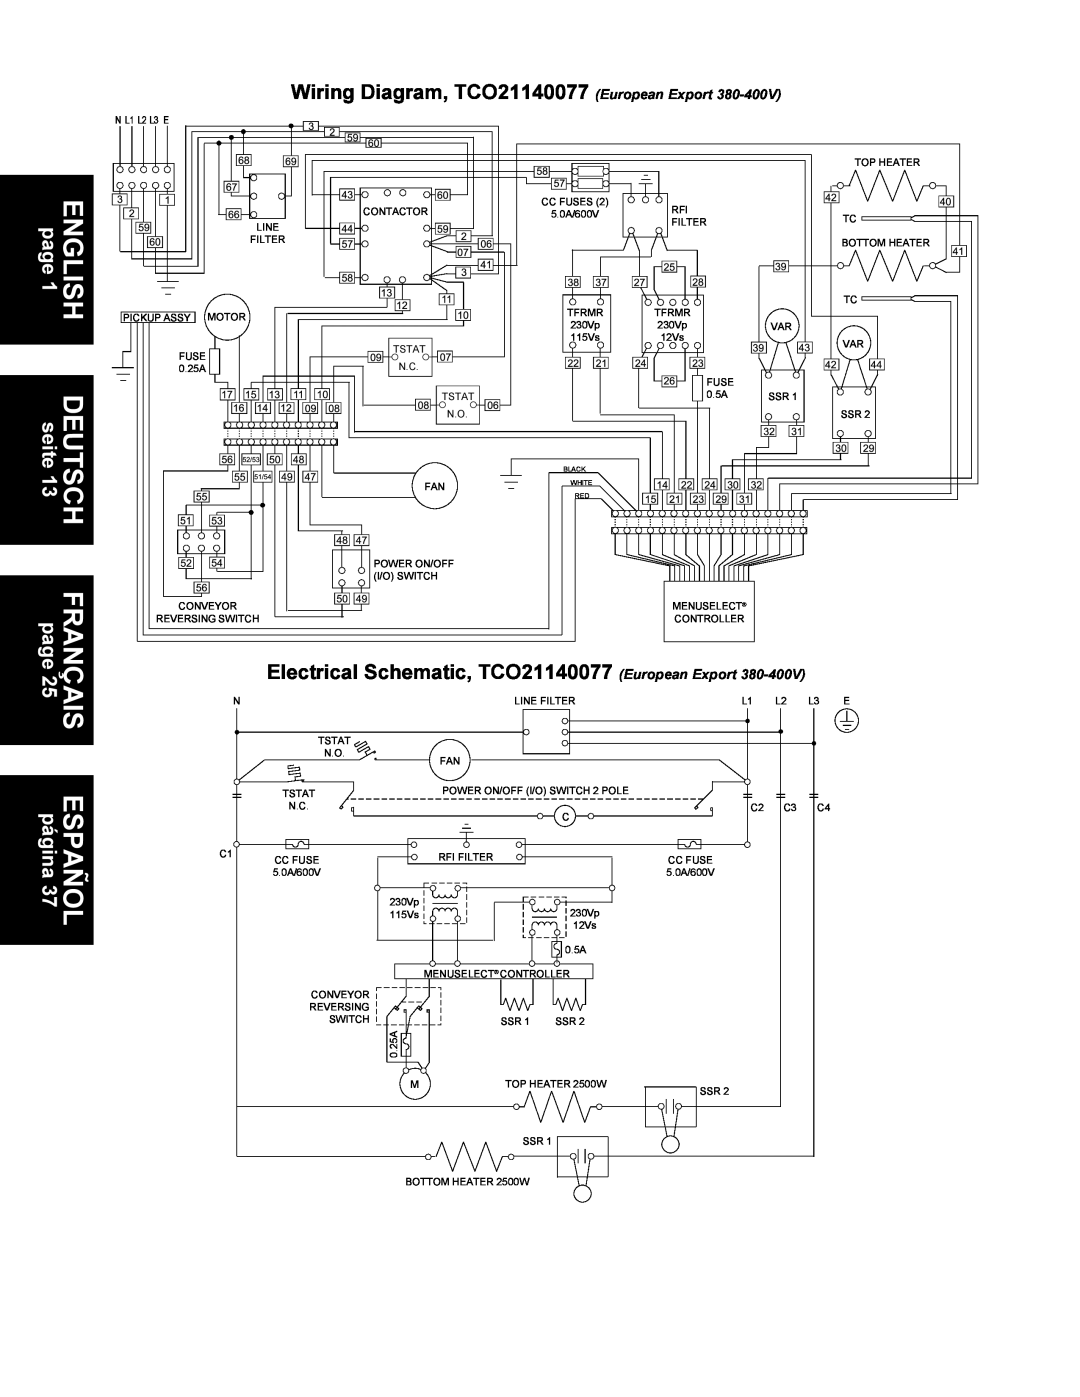 Middleby Cooking Systems Group TCO21140063, TCO21140035 Wiring Diagram, TCO21140077 European Export, ENGLISH page1 